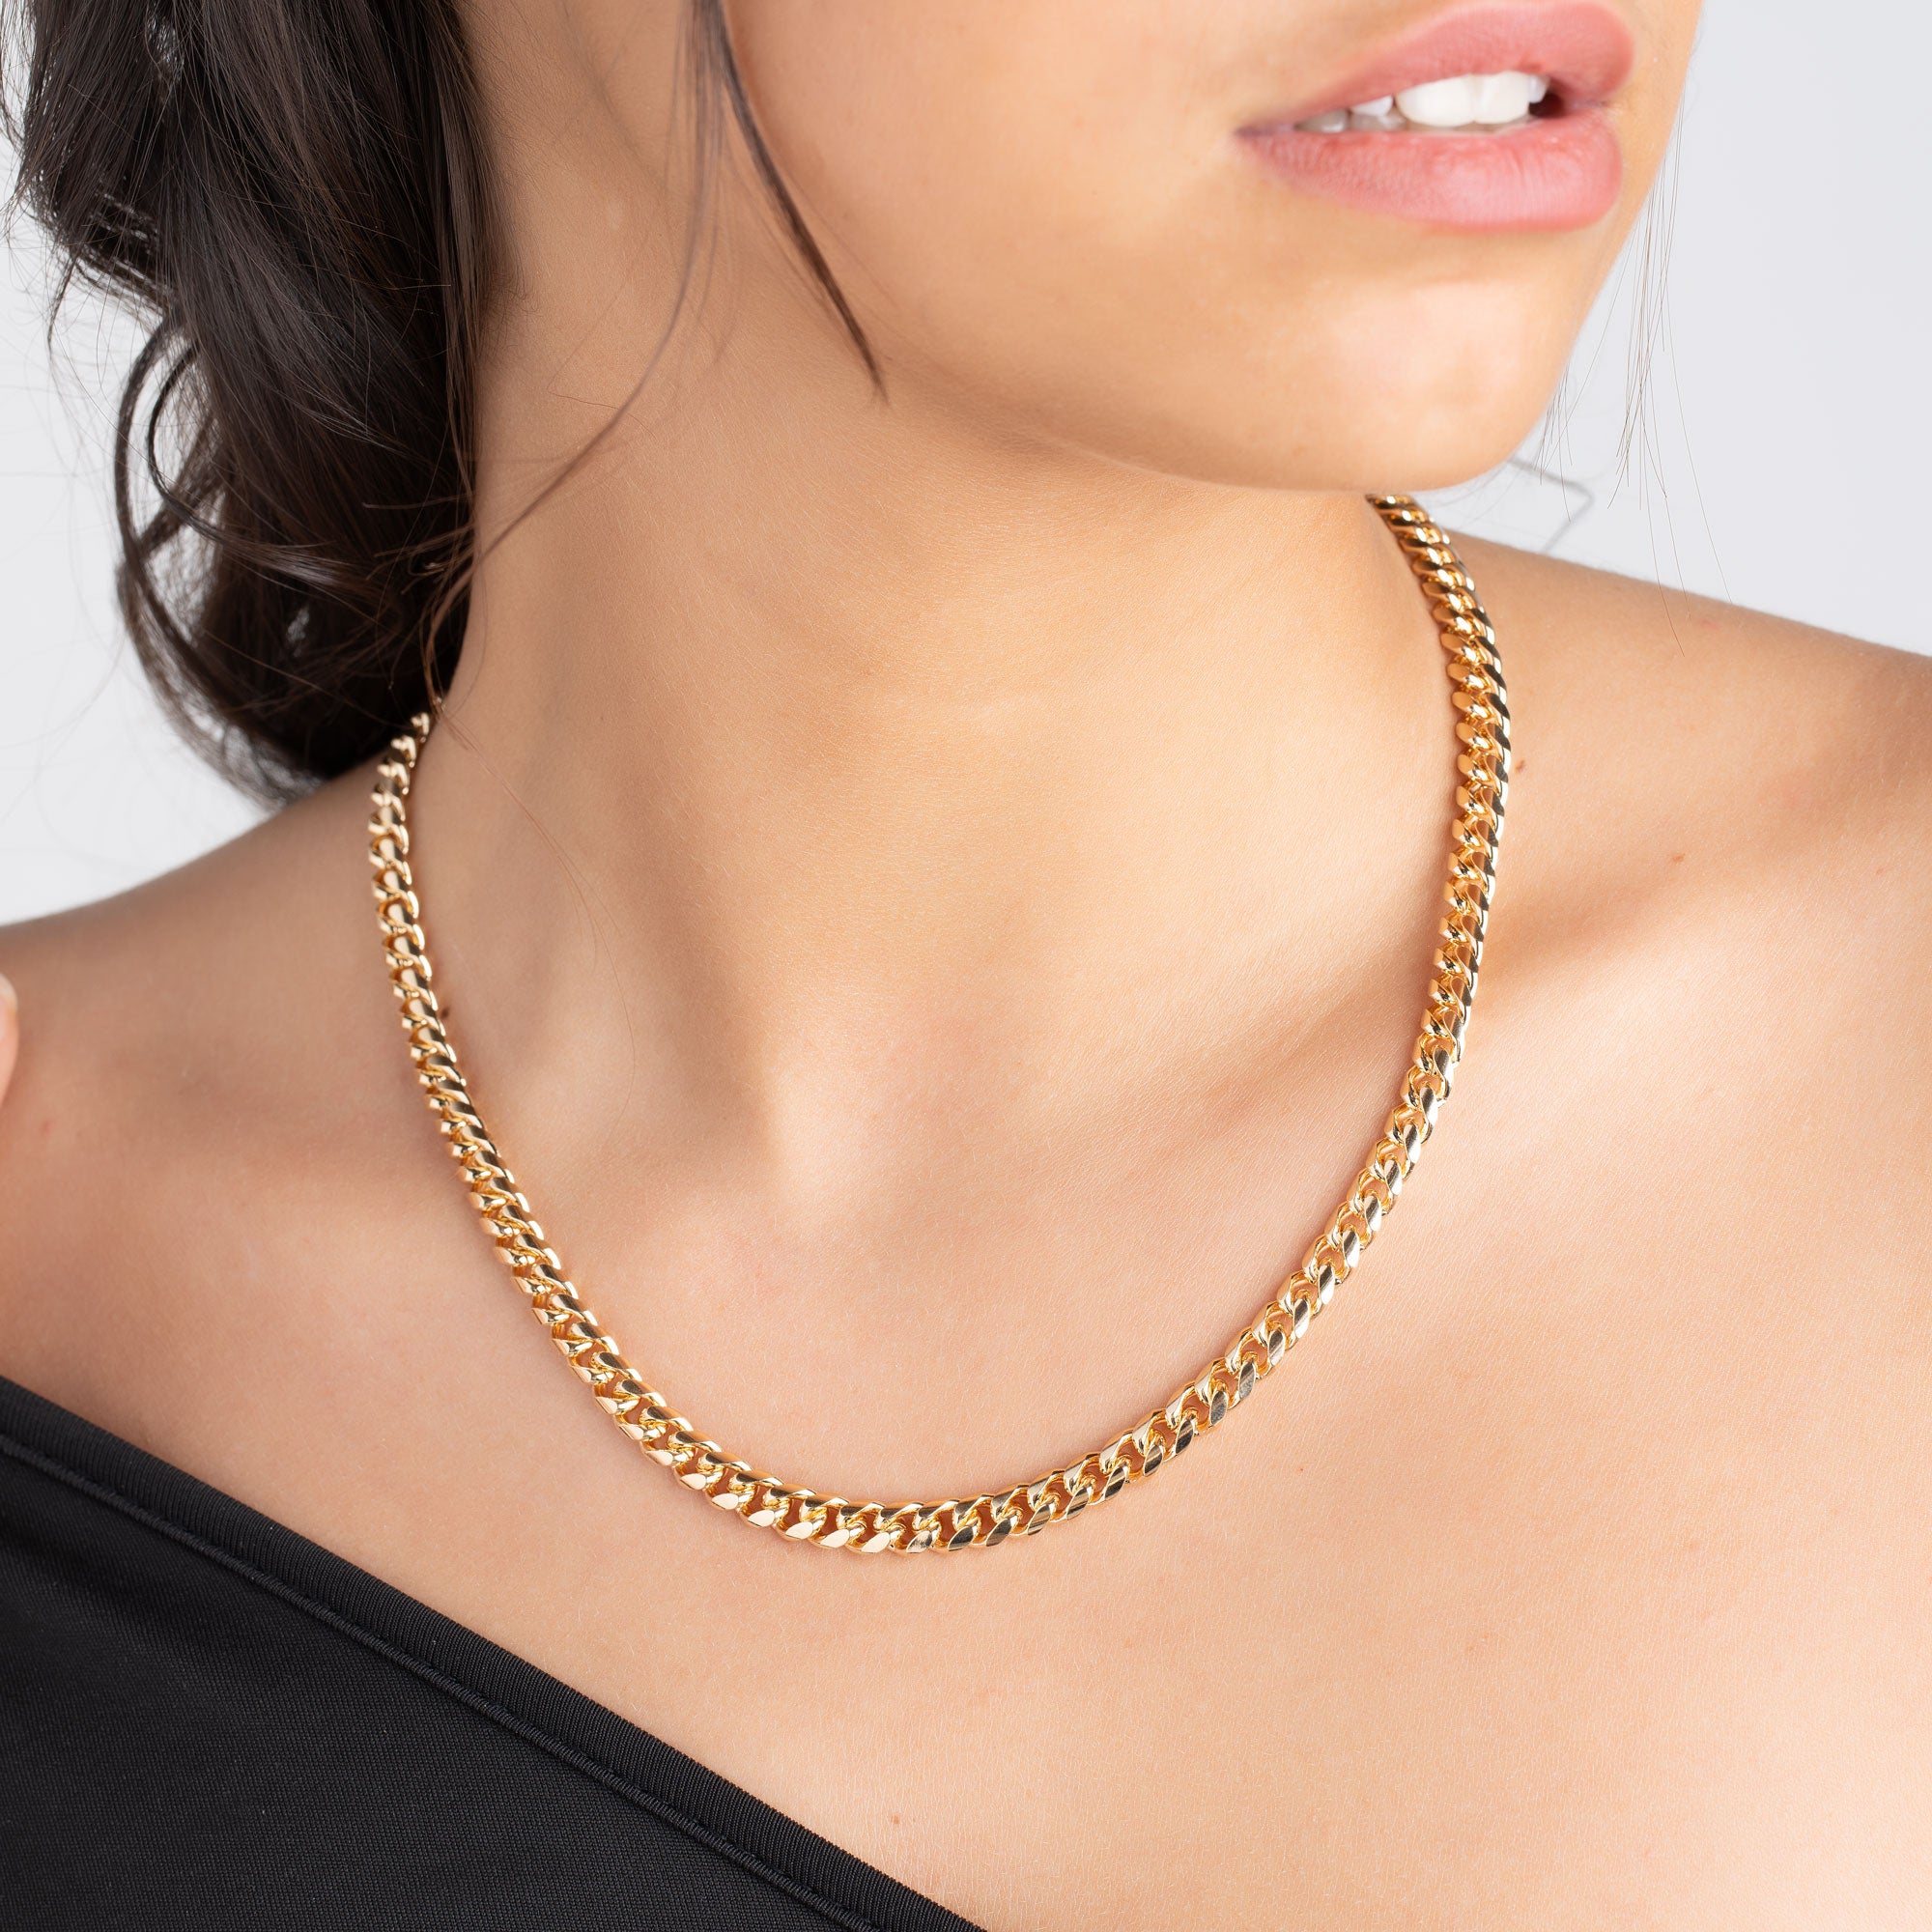 18k Gold Plated Miami Cuban Necklace 6mm Thick